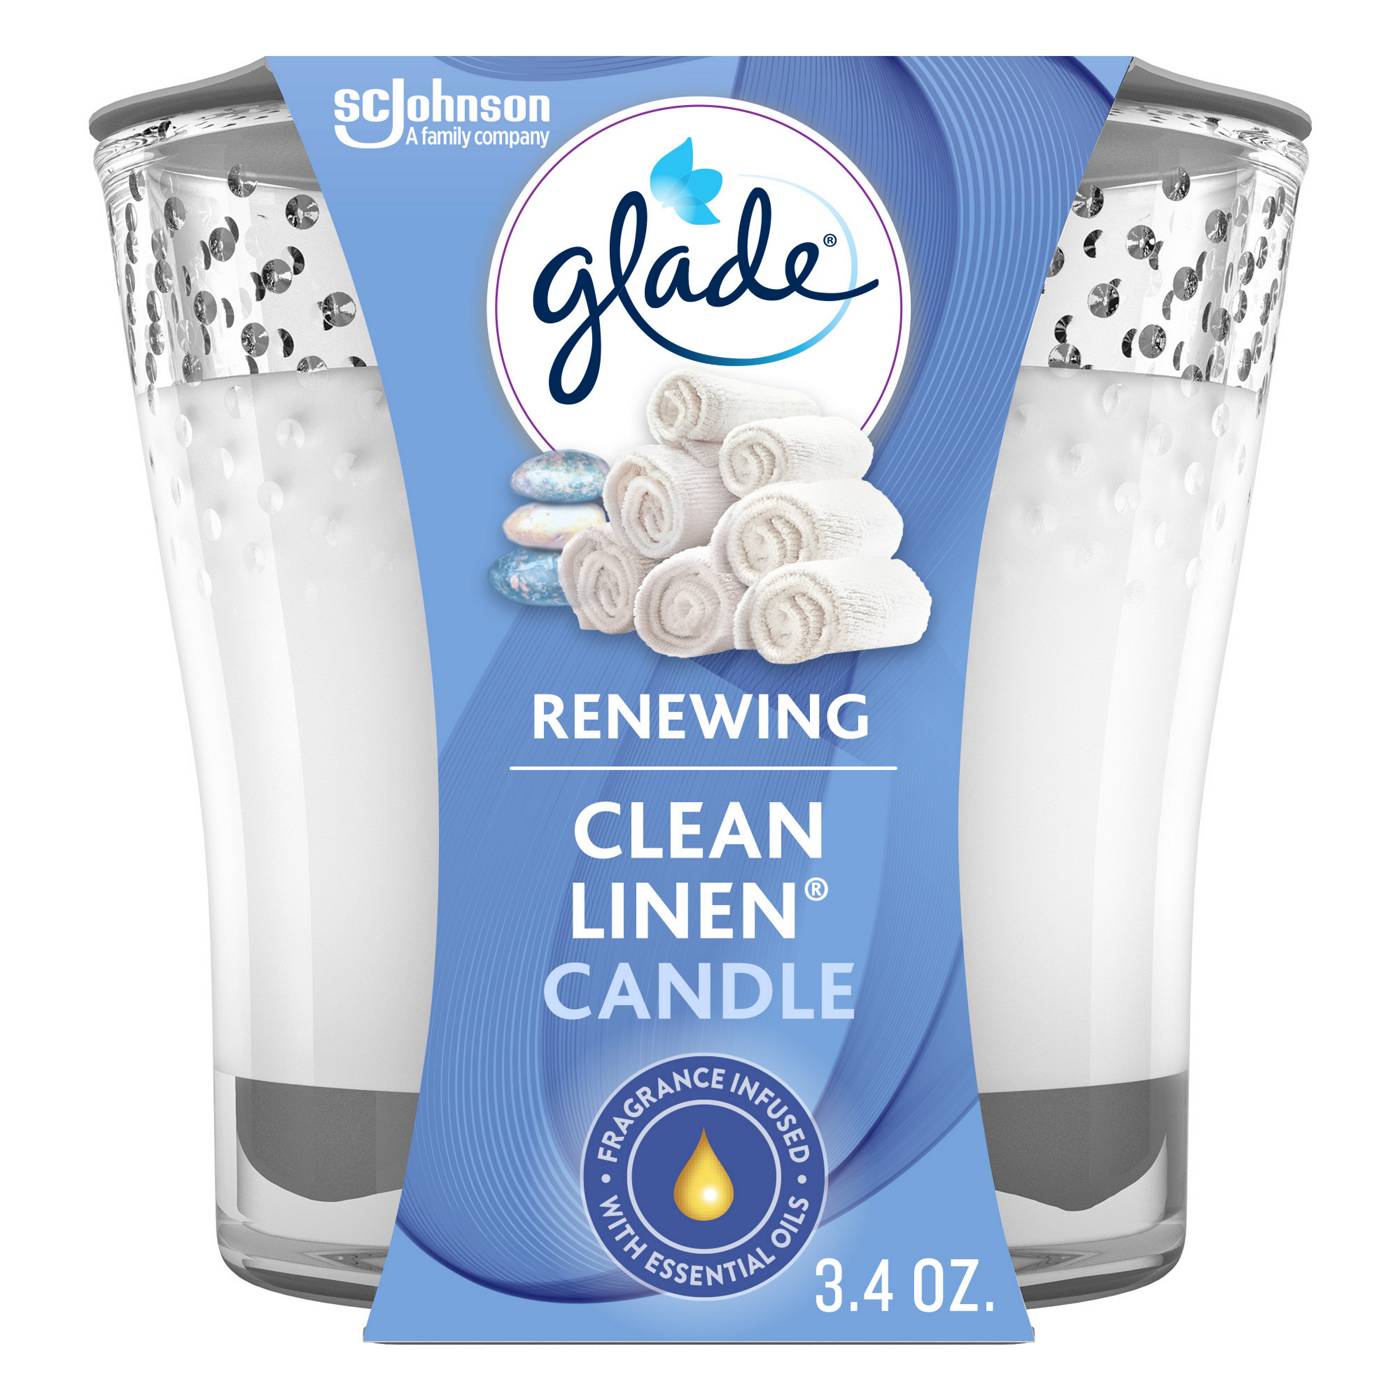 Glade Clean Linen Candle; image 1 of 2